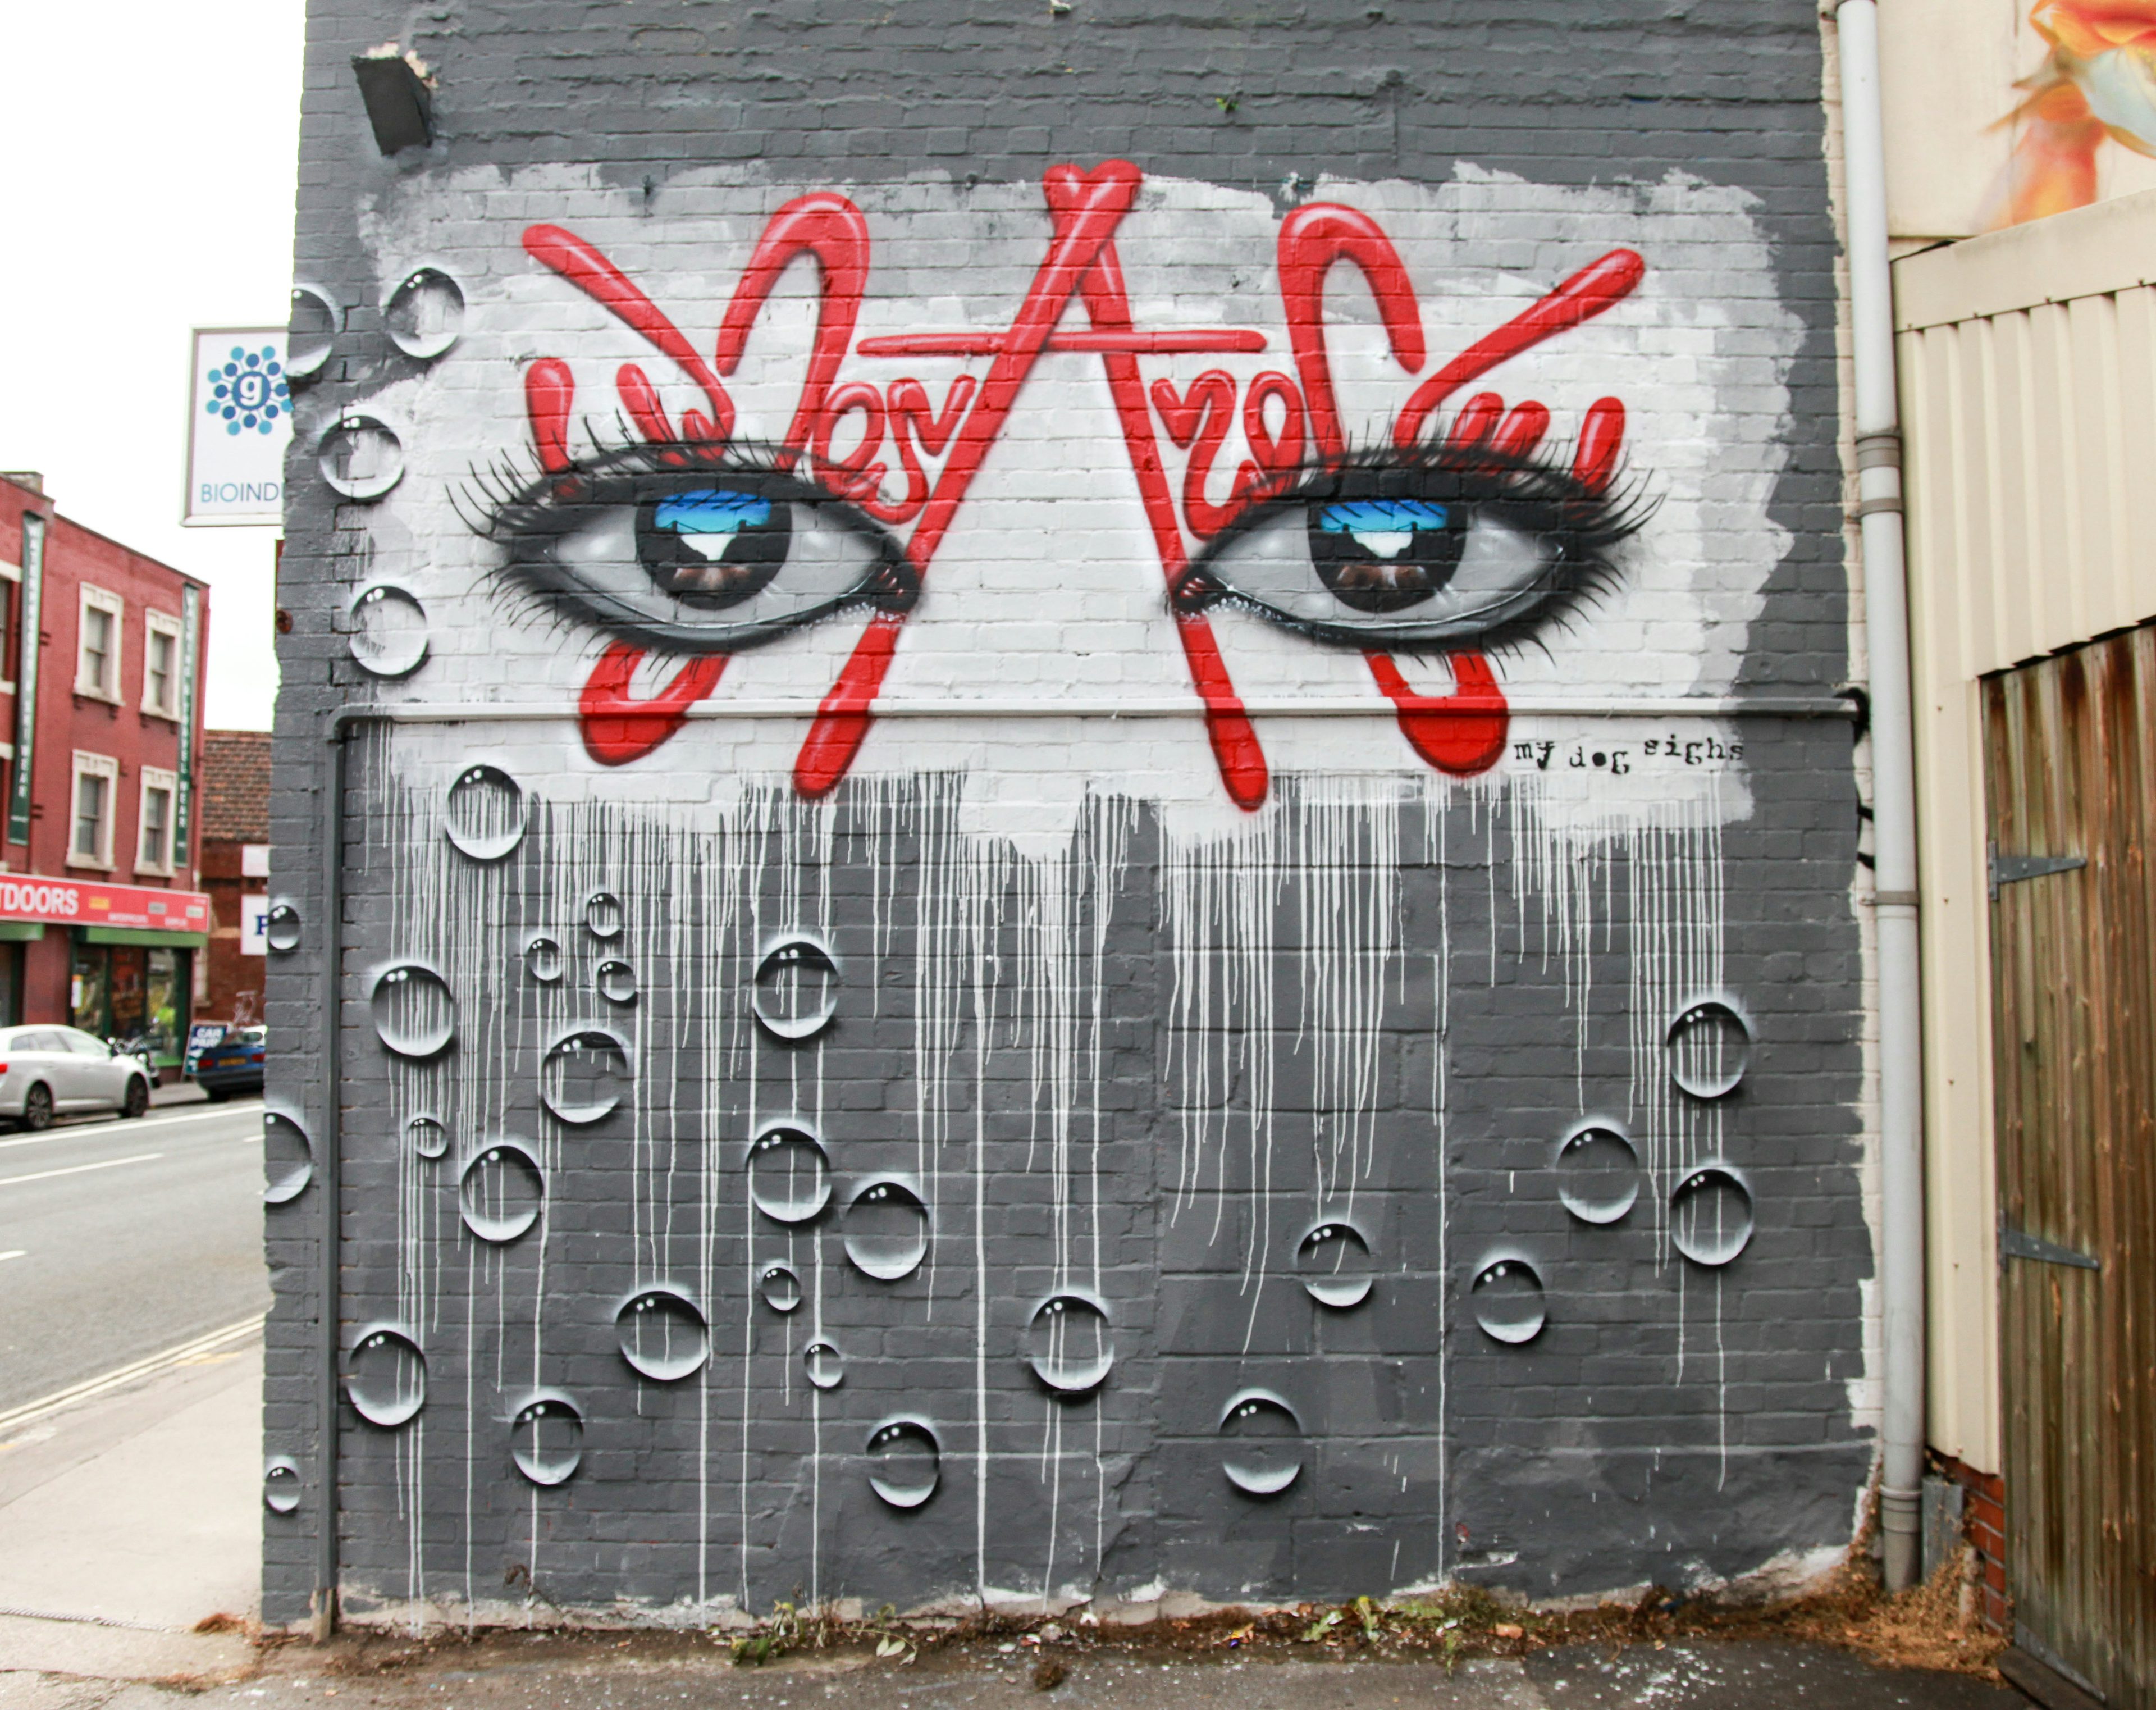 My Dog Sighs – Free as in artist